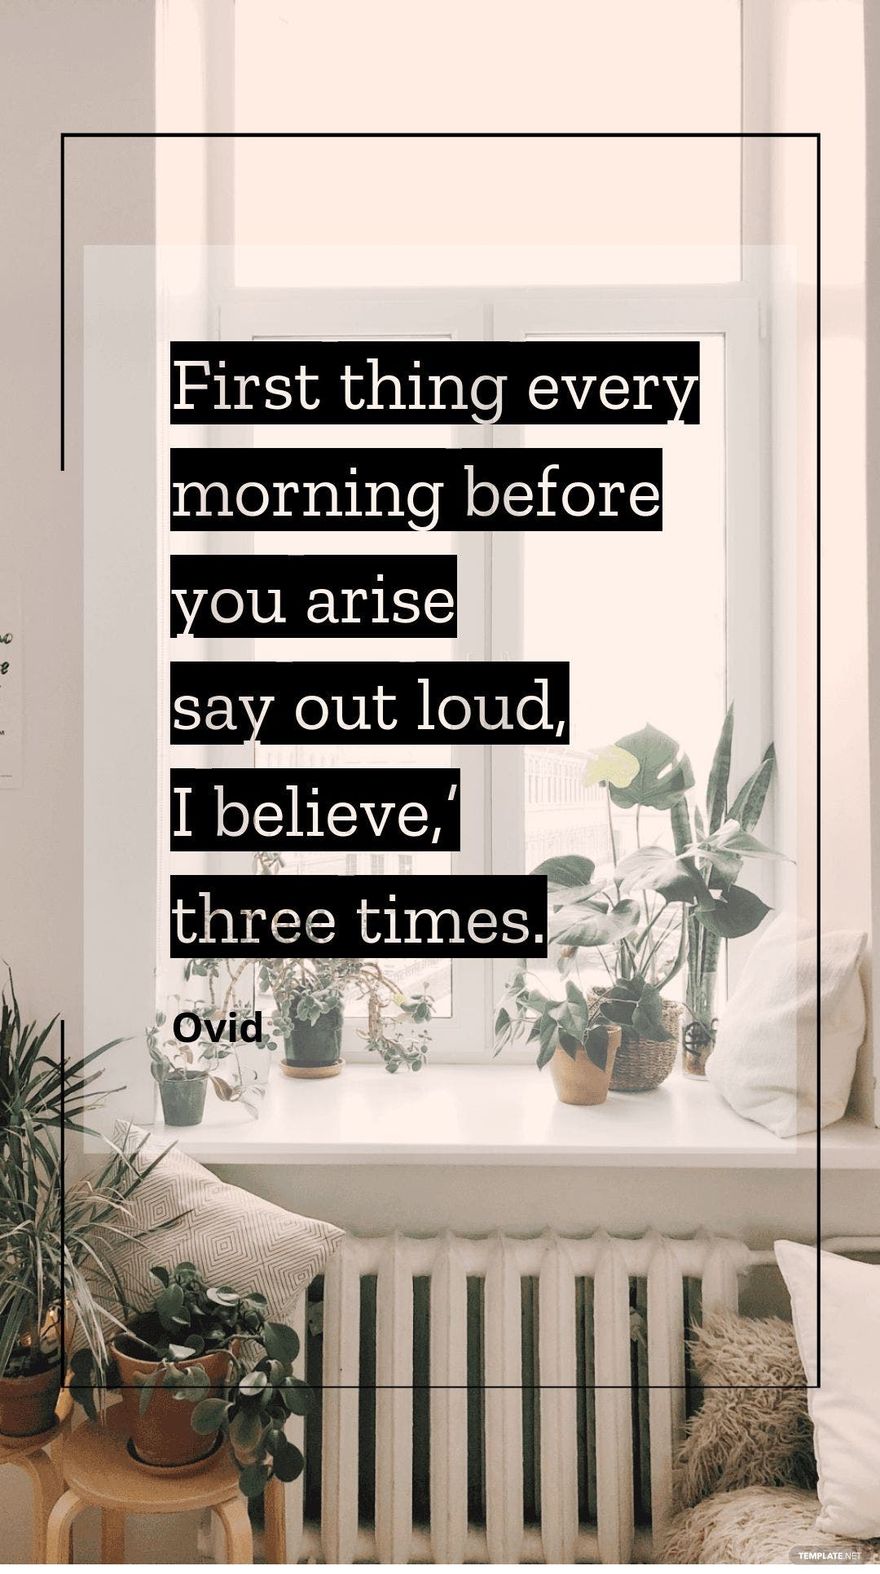 Ovid - First thing every morning before you arise say out loud, ‘I believe,’ three times.